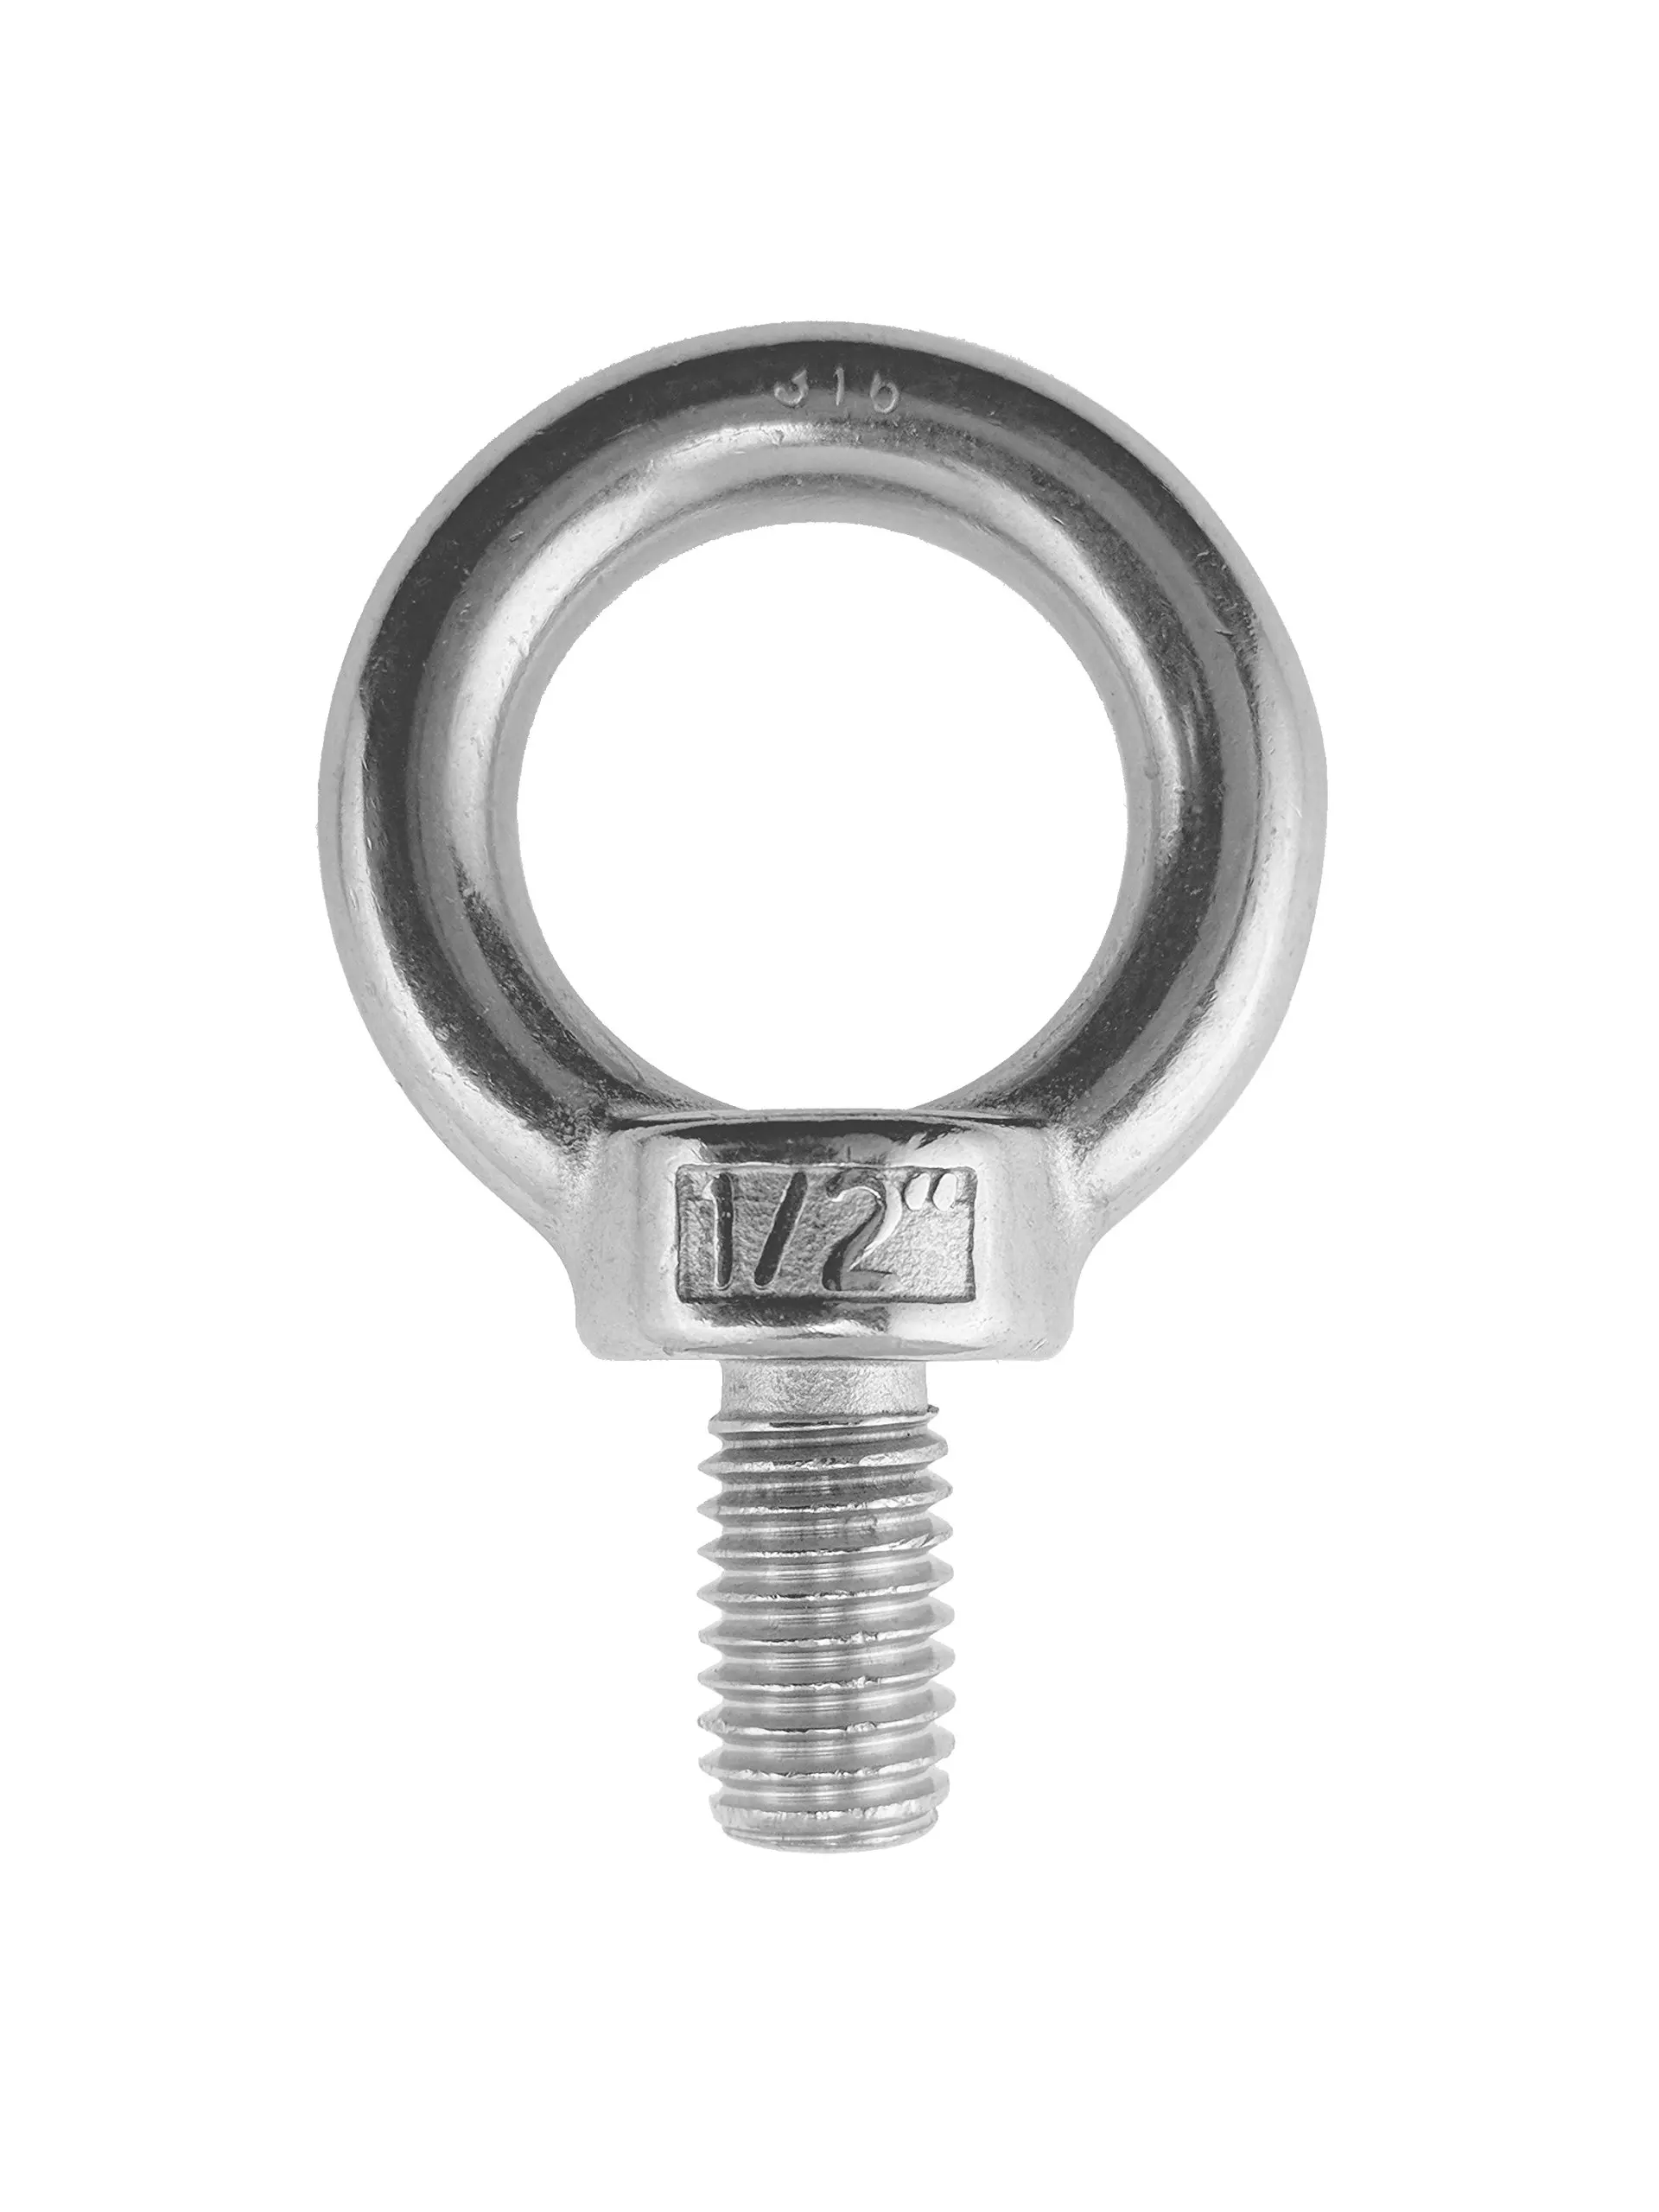 1/4-20 Stainless Steel Wing Nuts 1/4-20 Butterfly Nuts 316 Marine Grade Stainless Steel 5 Pieces